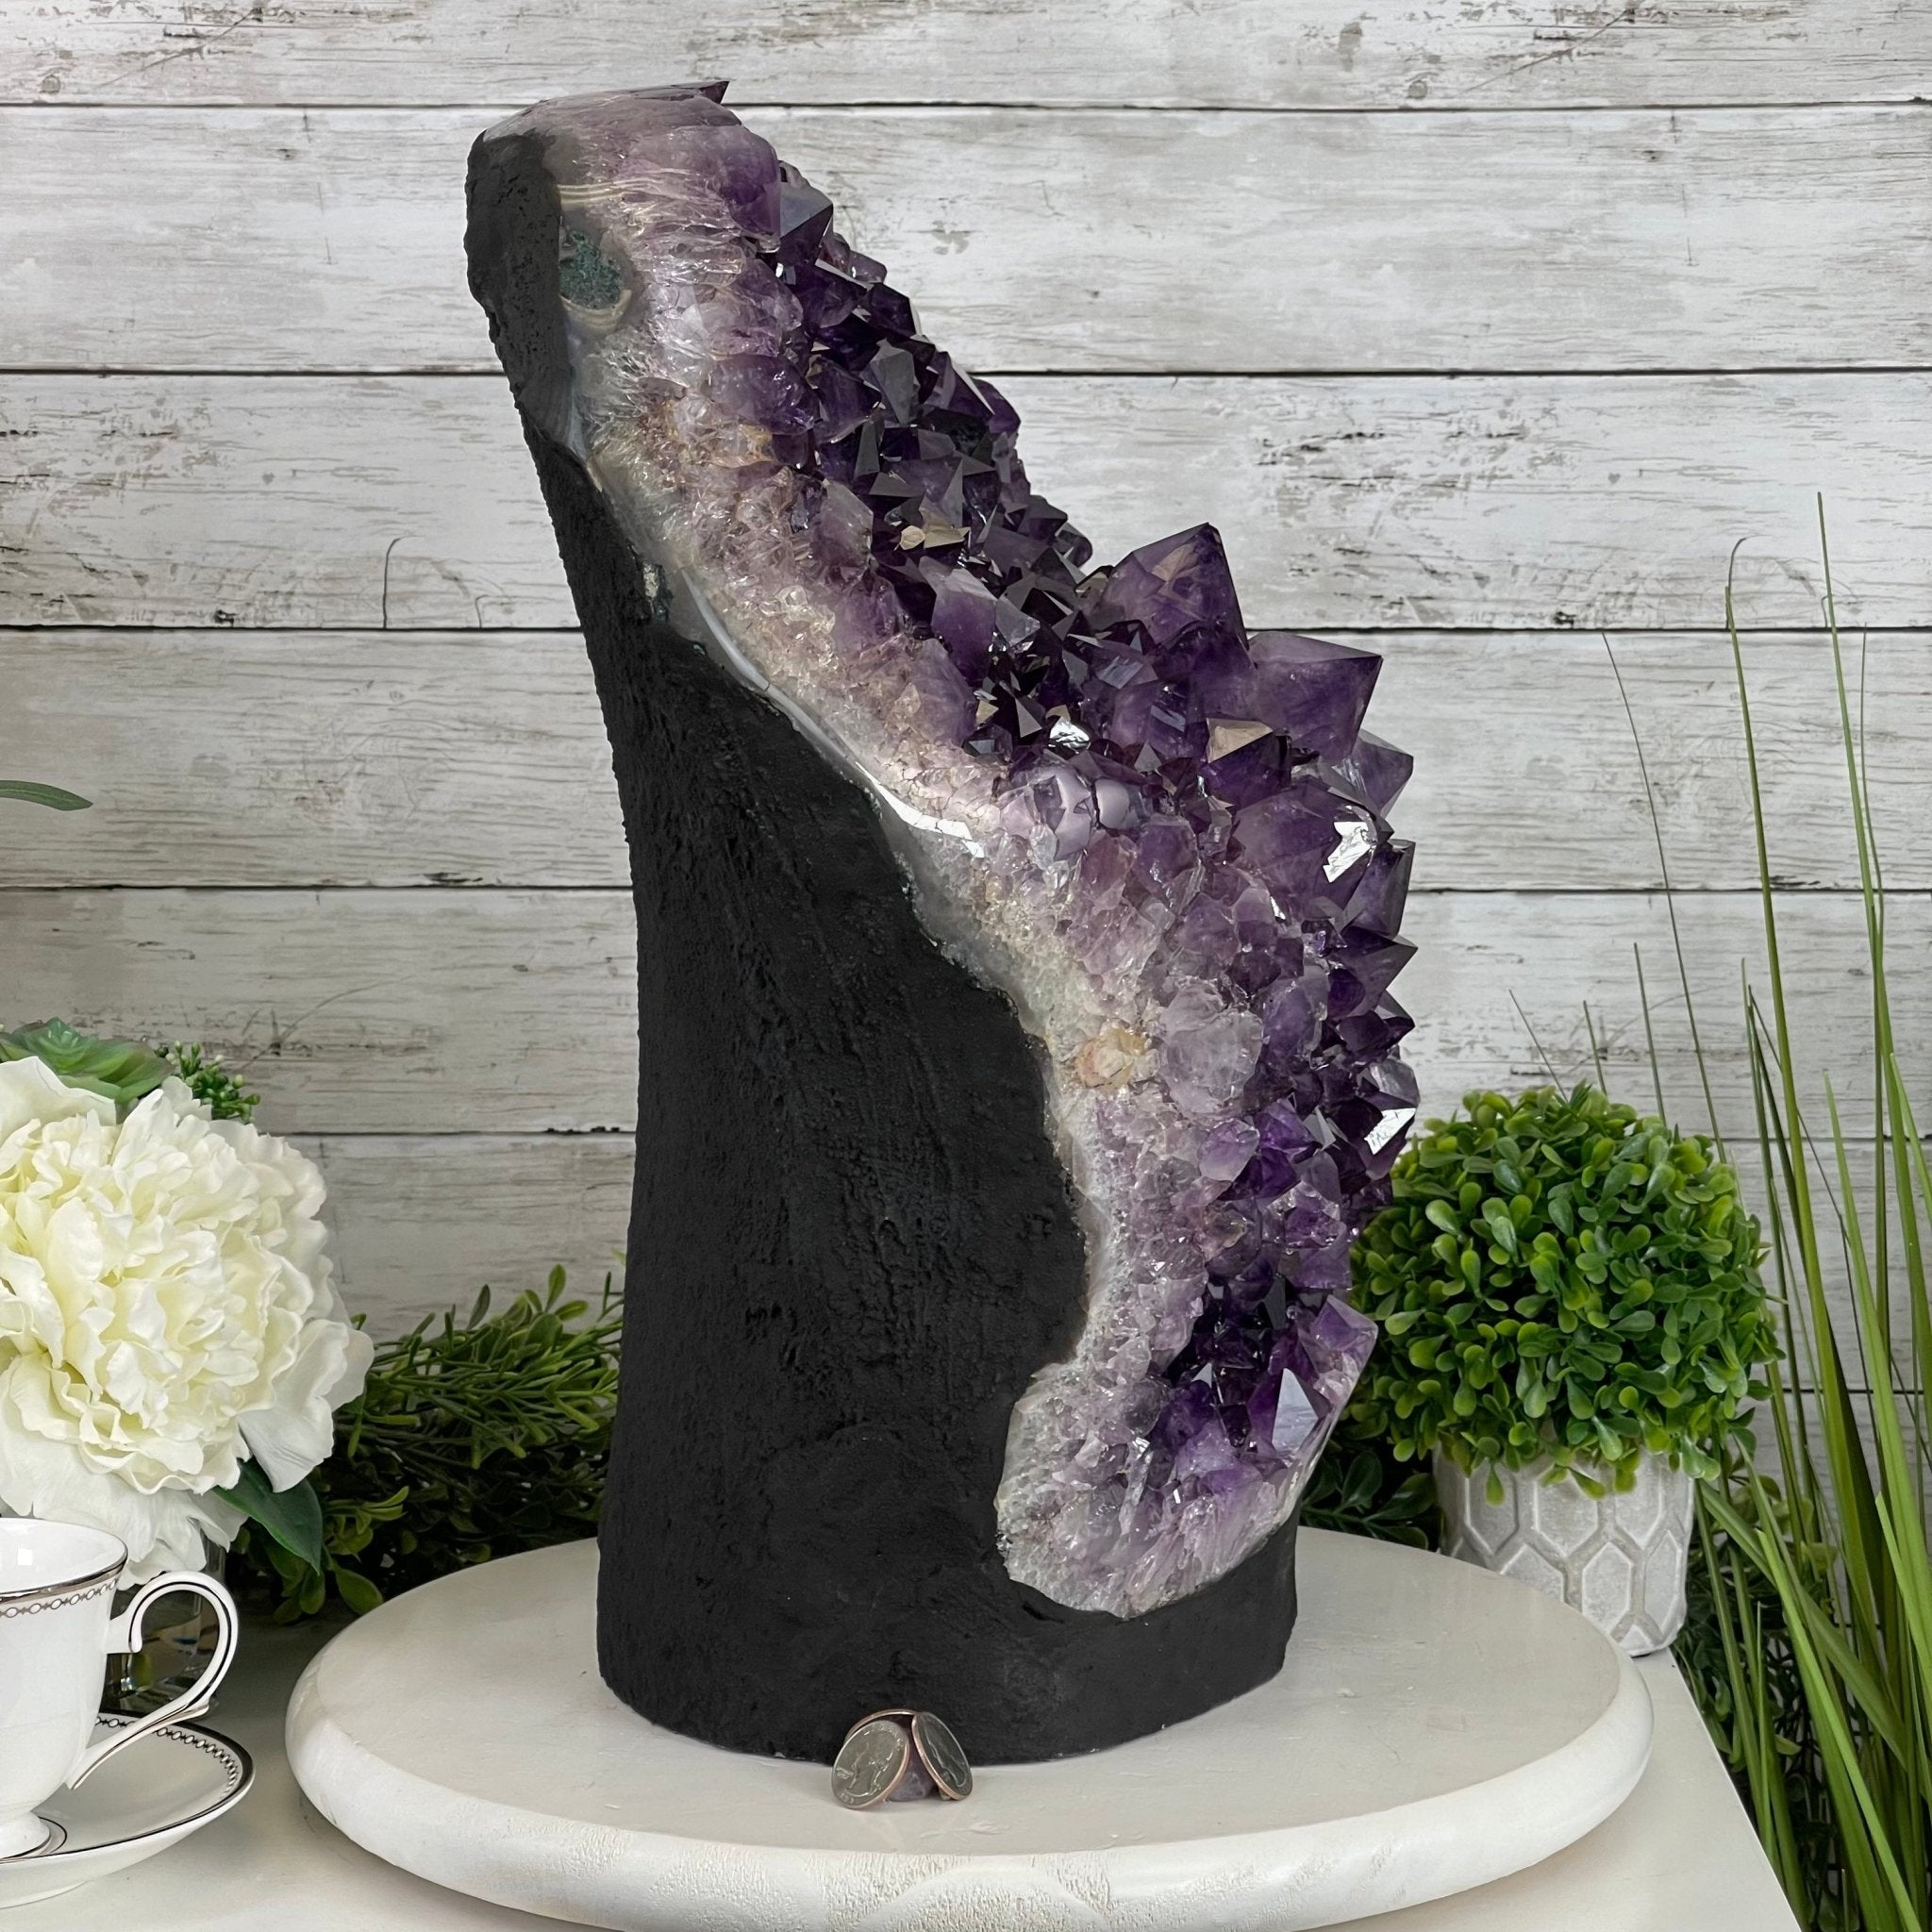 Extra Quality Amethyst Druse Cluster on Cement Base, 77.8 lbs and 16.7" Tall #5614-0062 - Brazil GemsBrazil GemsExtra Quality Amethyst Druse Cluster on Cement Base, 77.8 lbs and 16.7" Tall #5614-0062Clusters on Cement Bases5614-0062